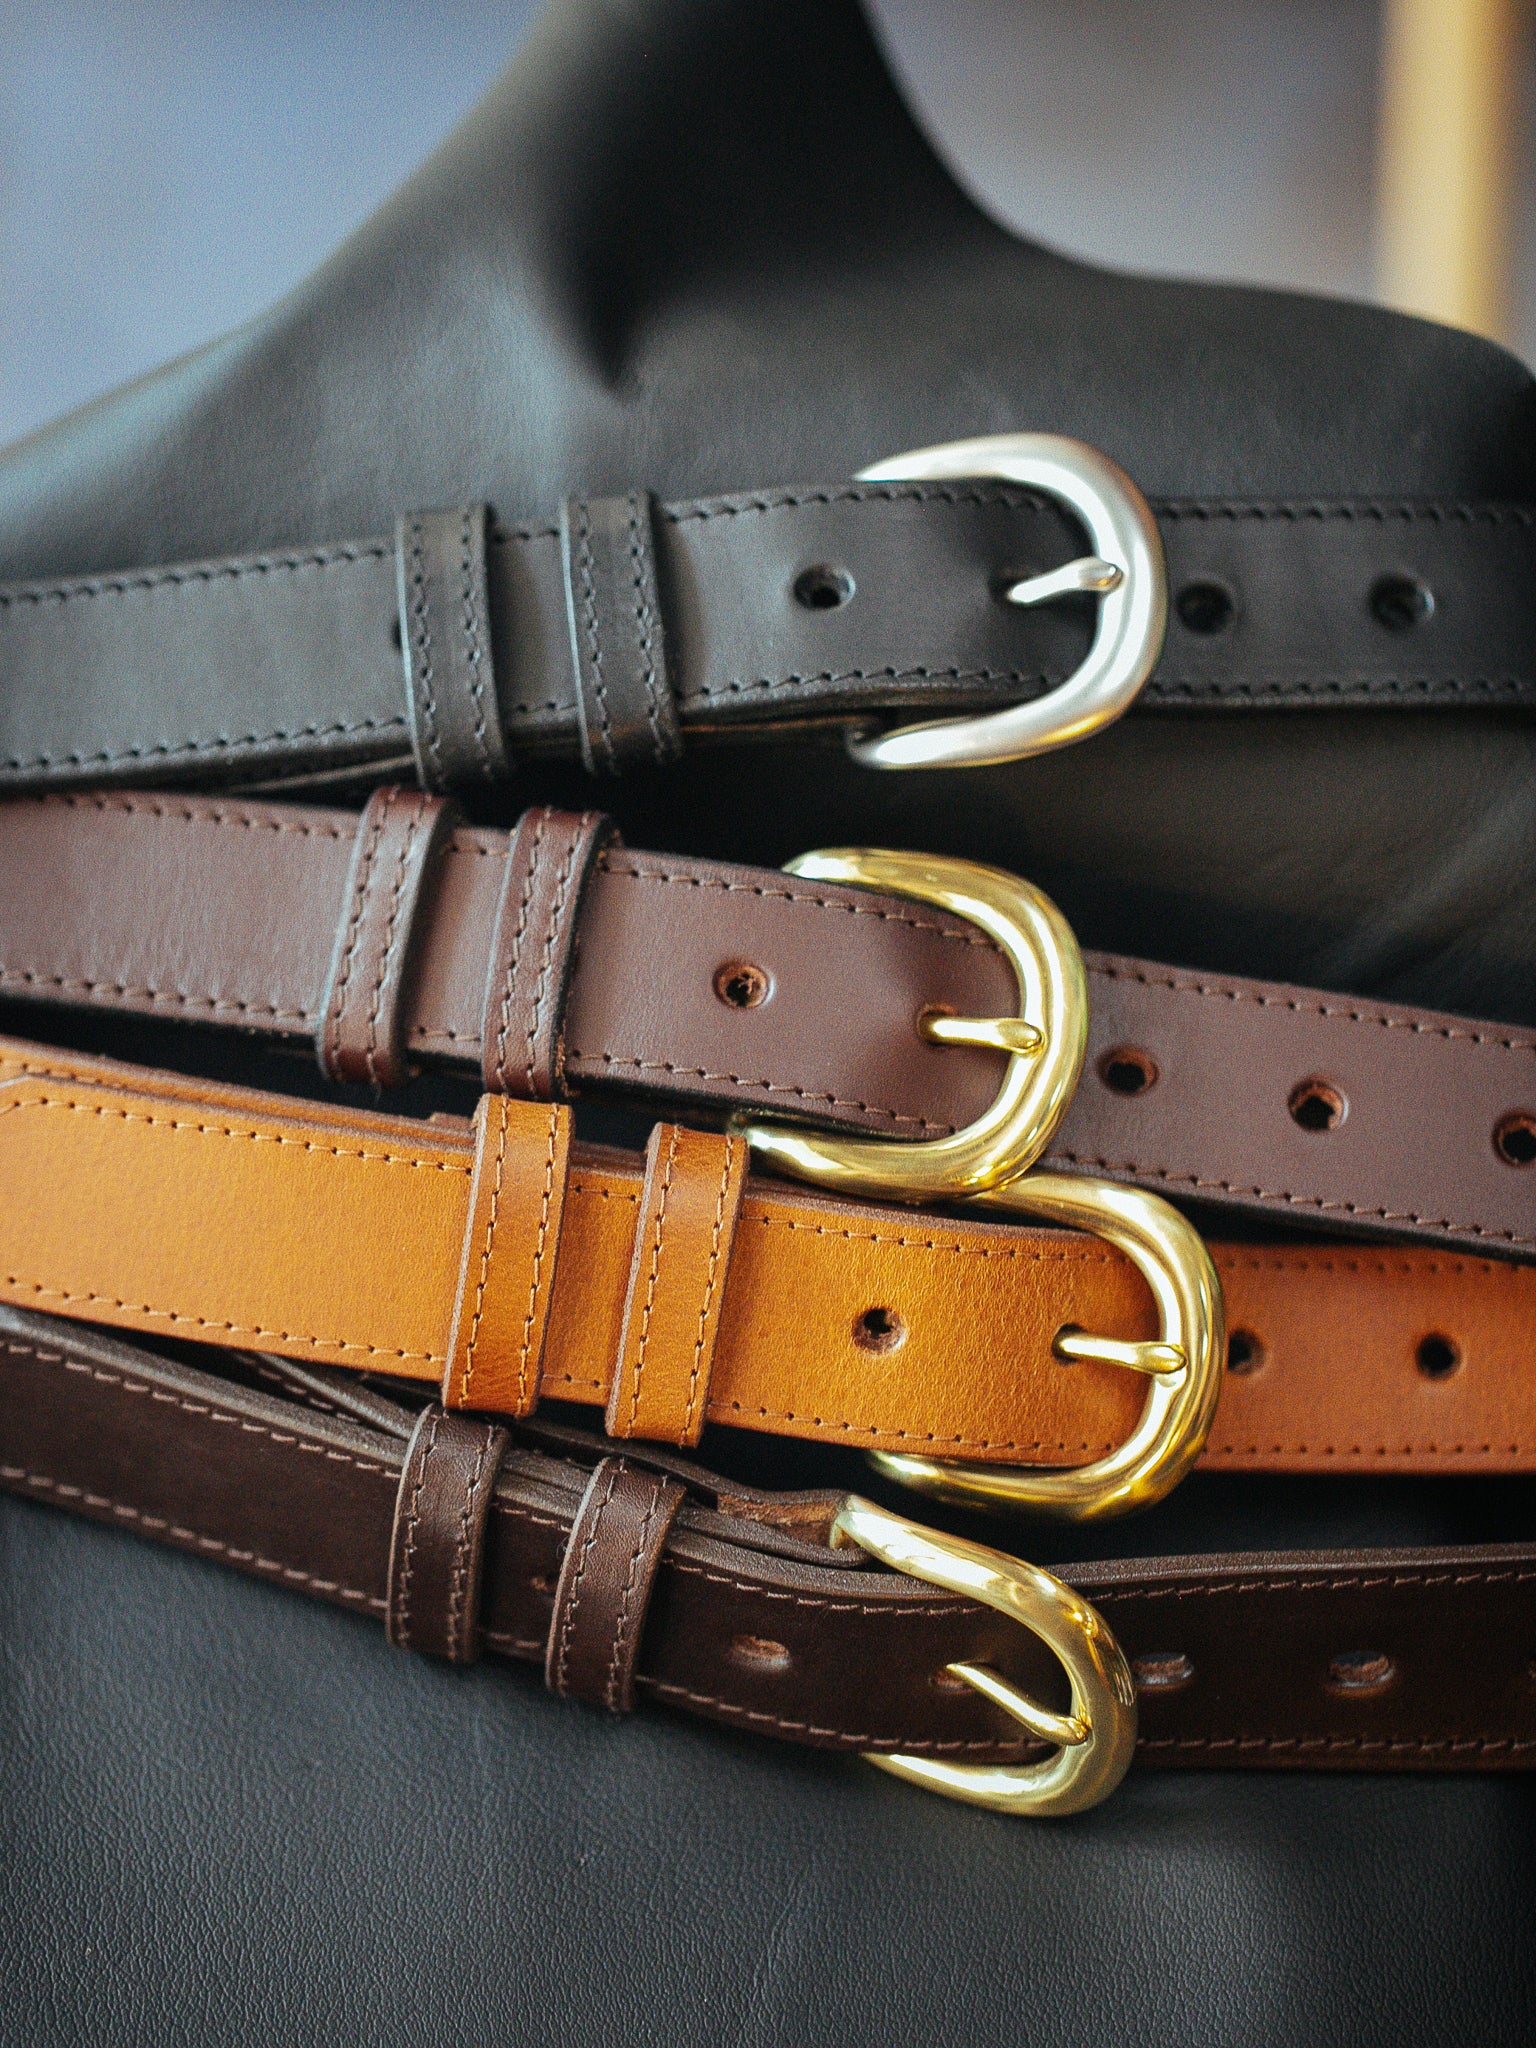 Leather belts - 100% Made in France - For your favorite trousers